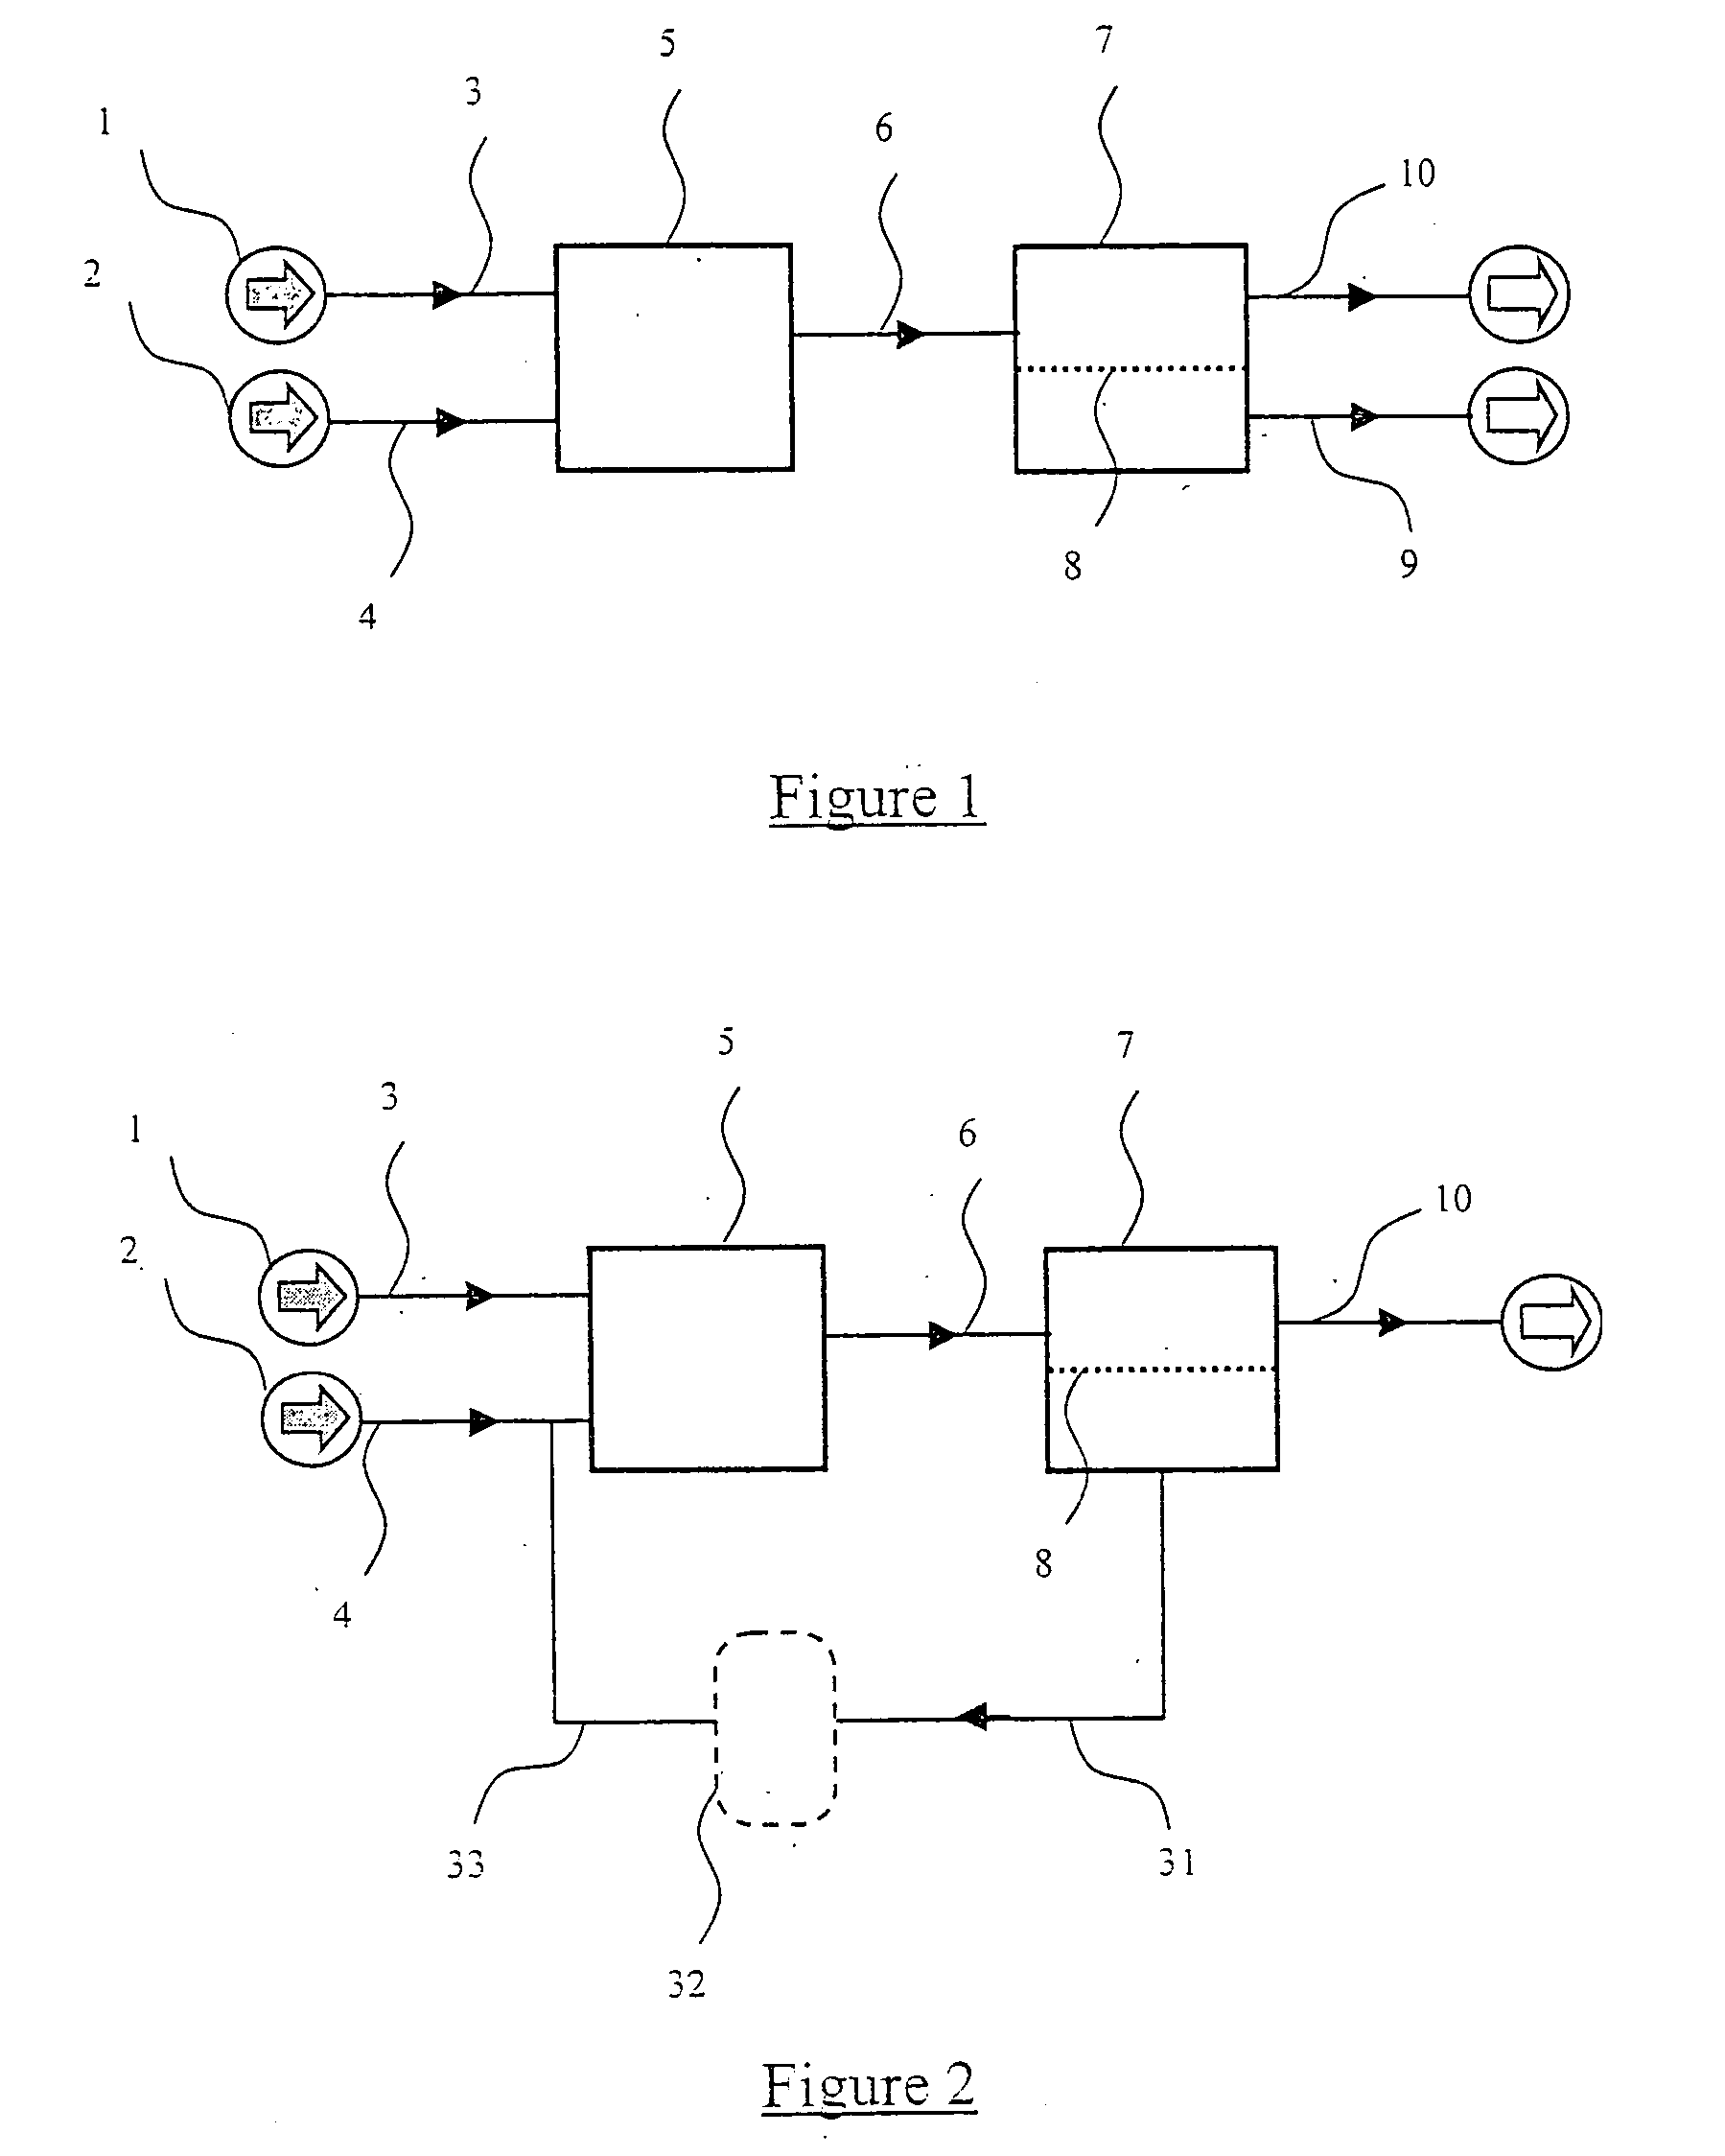 Process for producing fatty acid alkyl esters and glycerol of high-purity